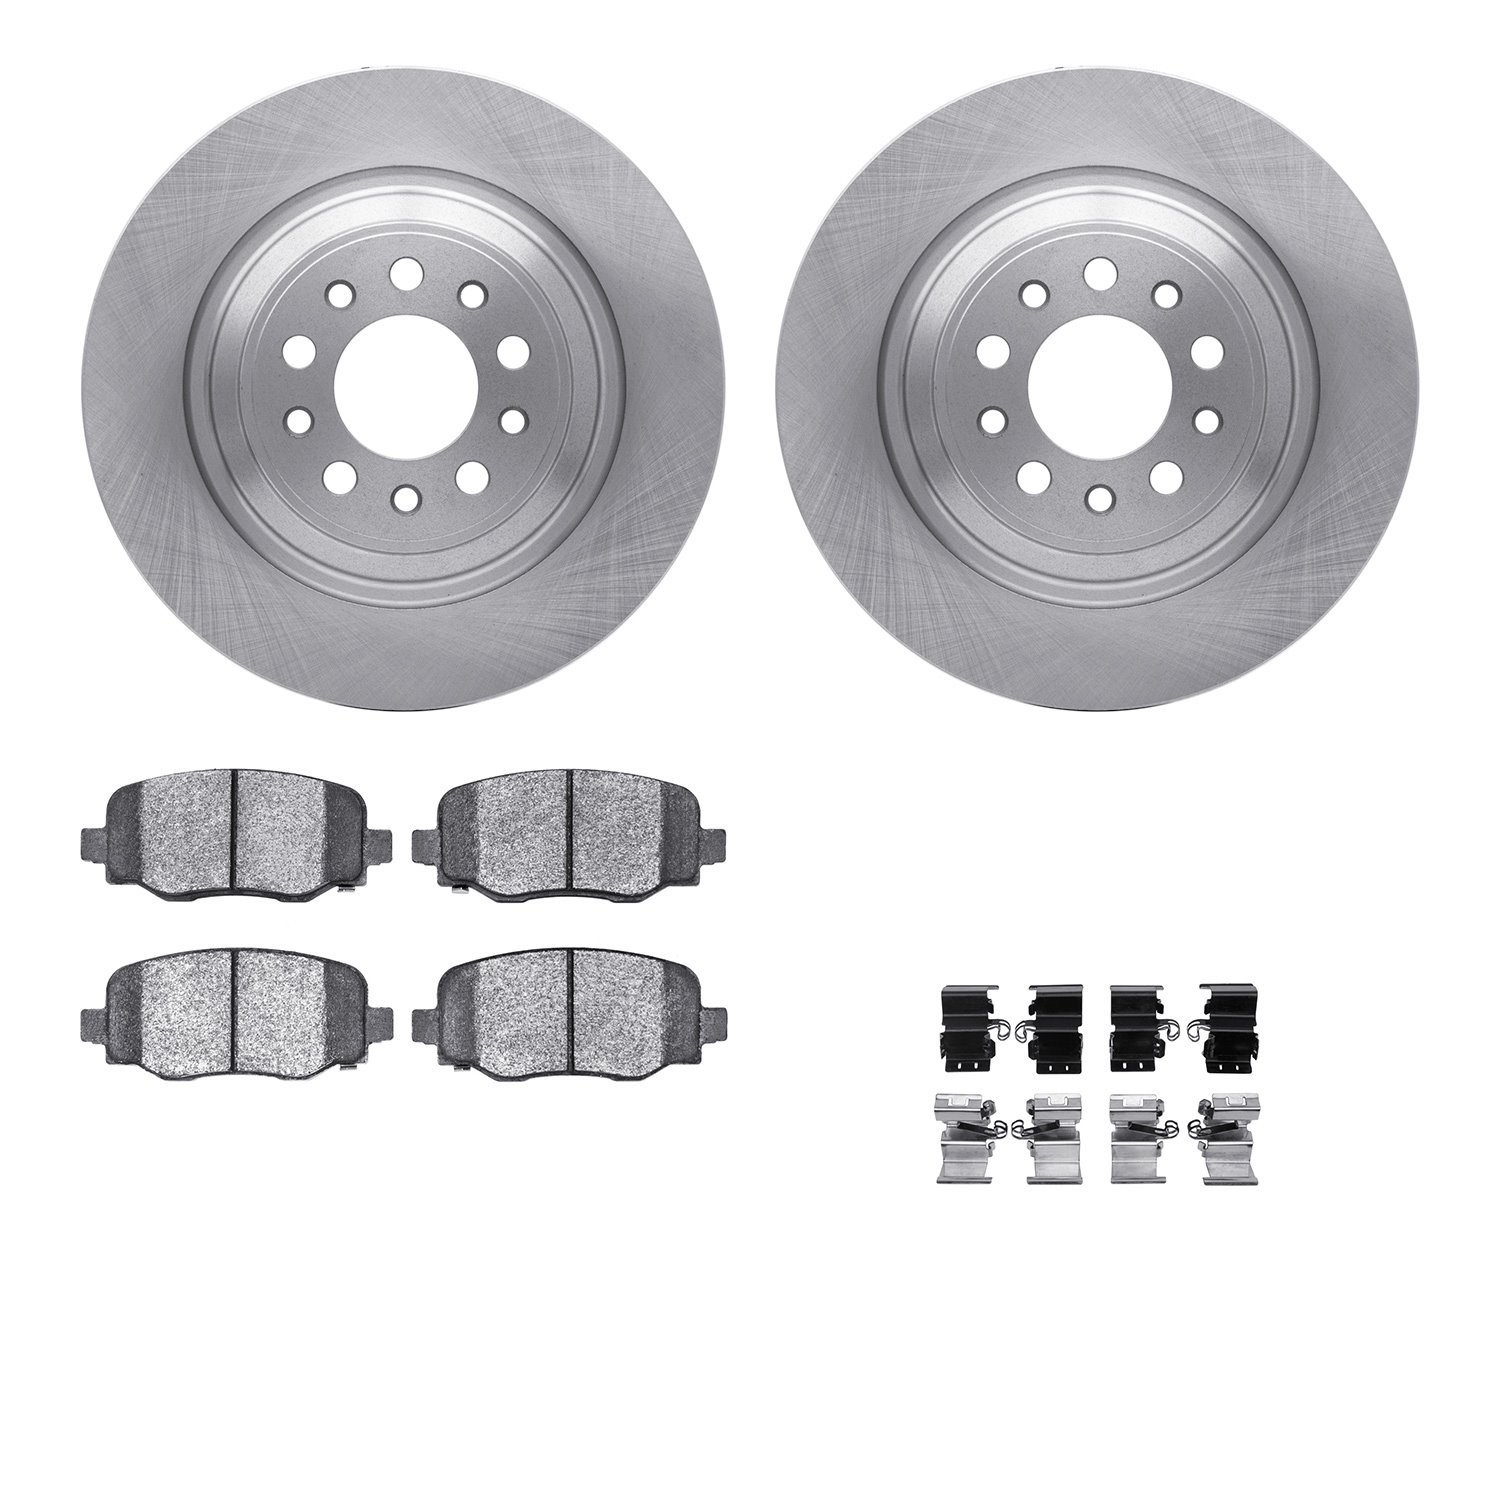 6312-42048 Brake Rotors with 3000-Series Ceramic Brake Pads Kit with Hardware, Fits Select Mopar, Position: Rear